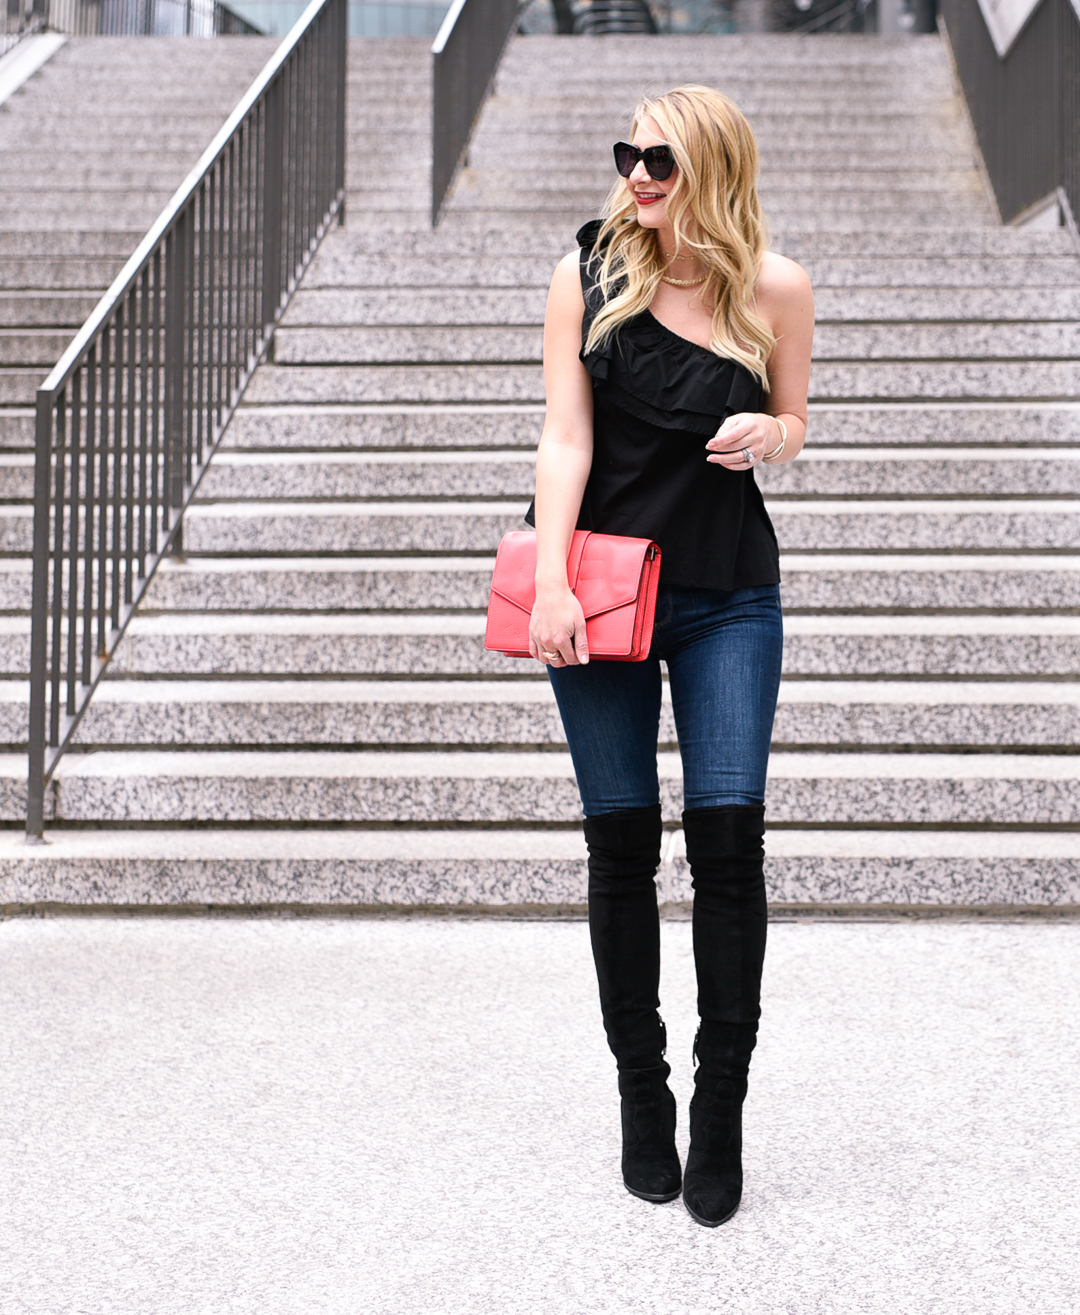 A chic and flattering outfit with a black one shoulder top and suede over the knee boots.